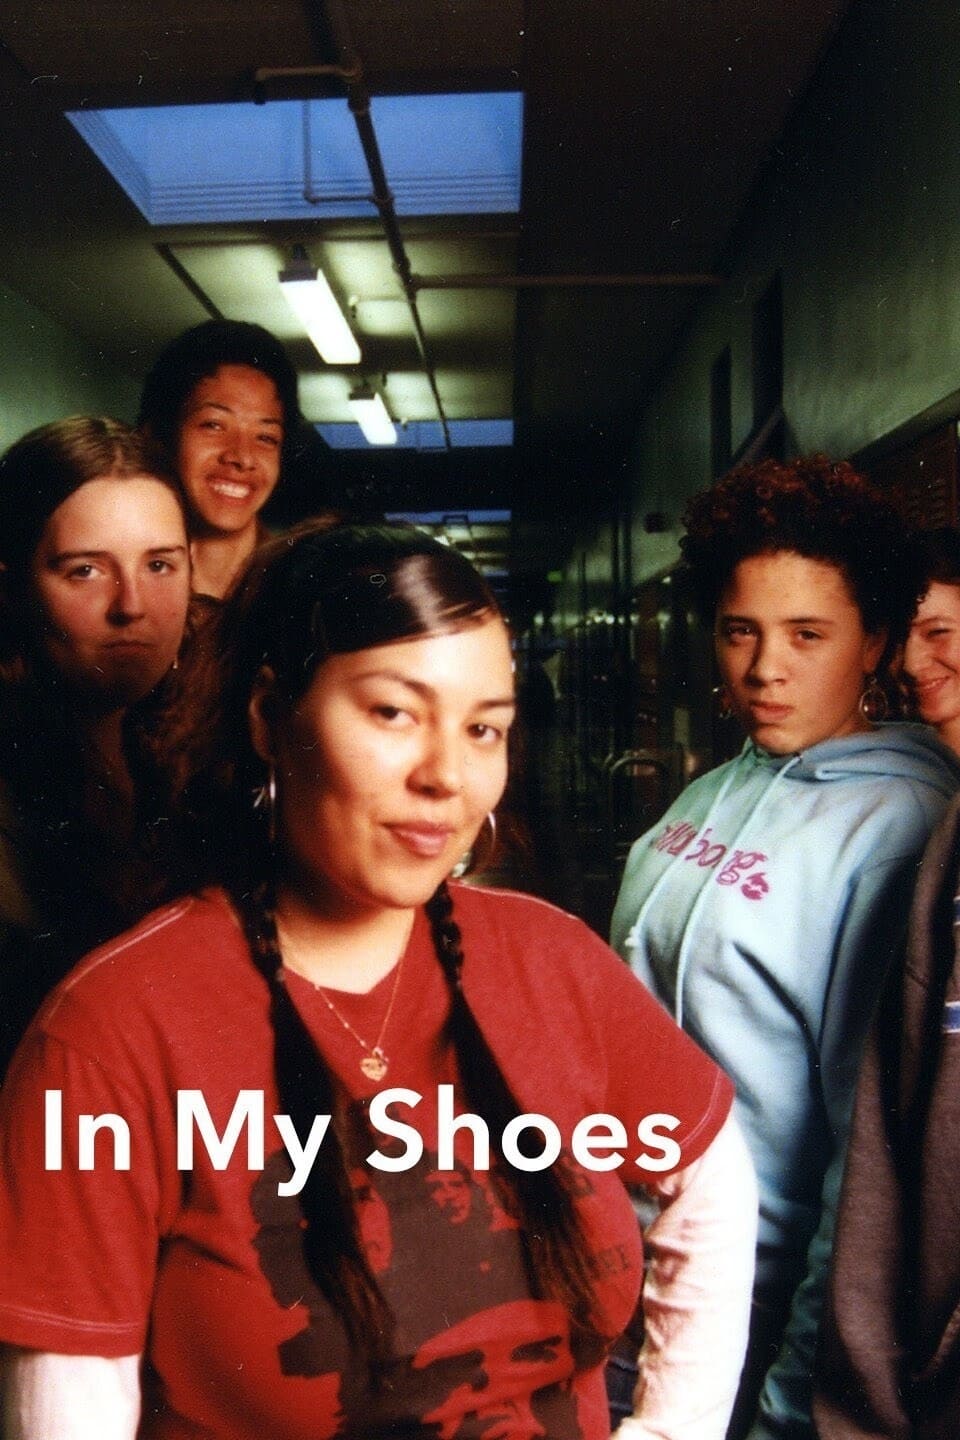 In My Shoes: Stories of Youth with LGBT Parents